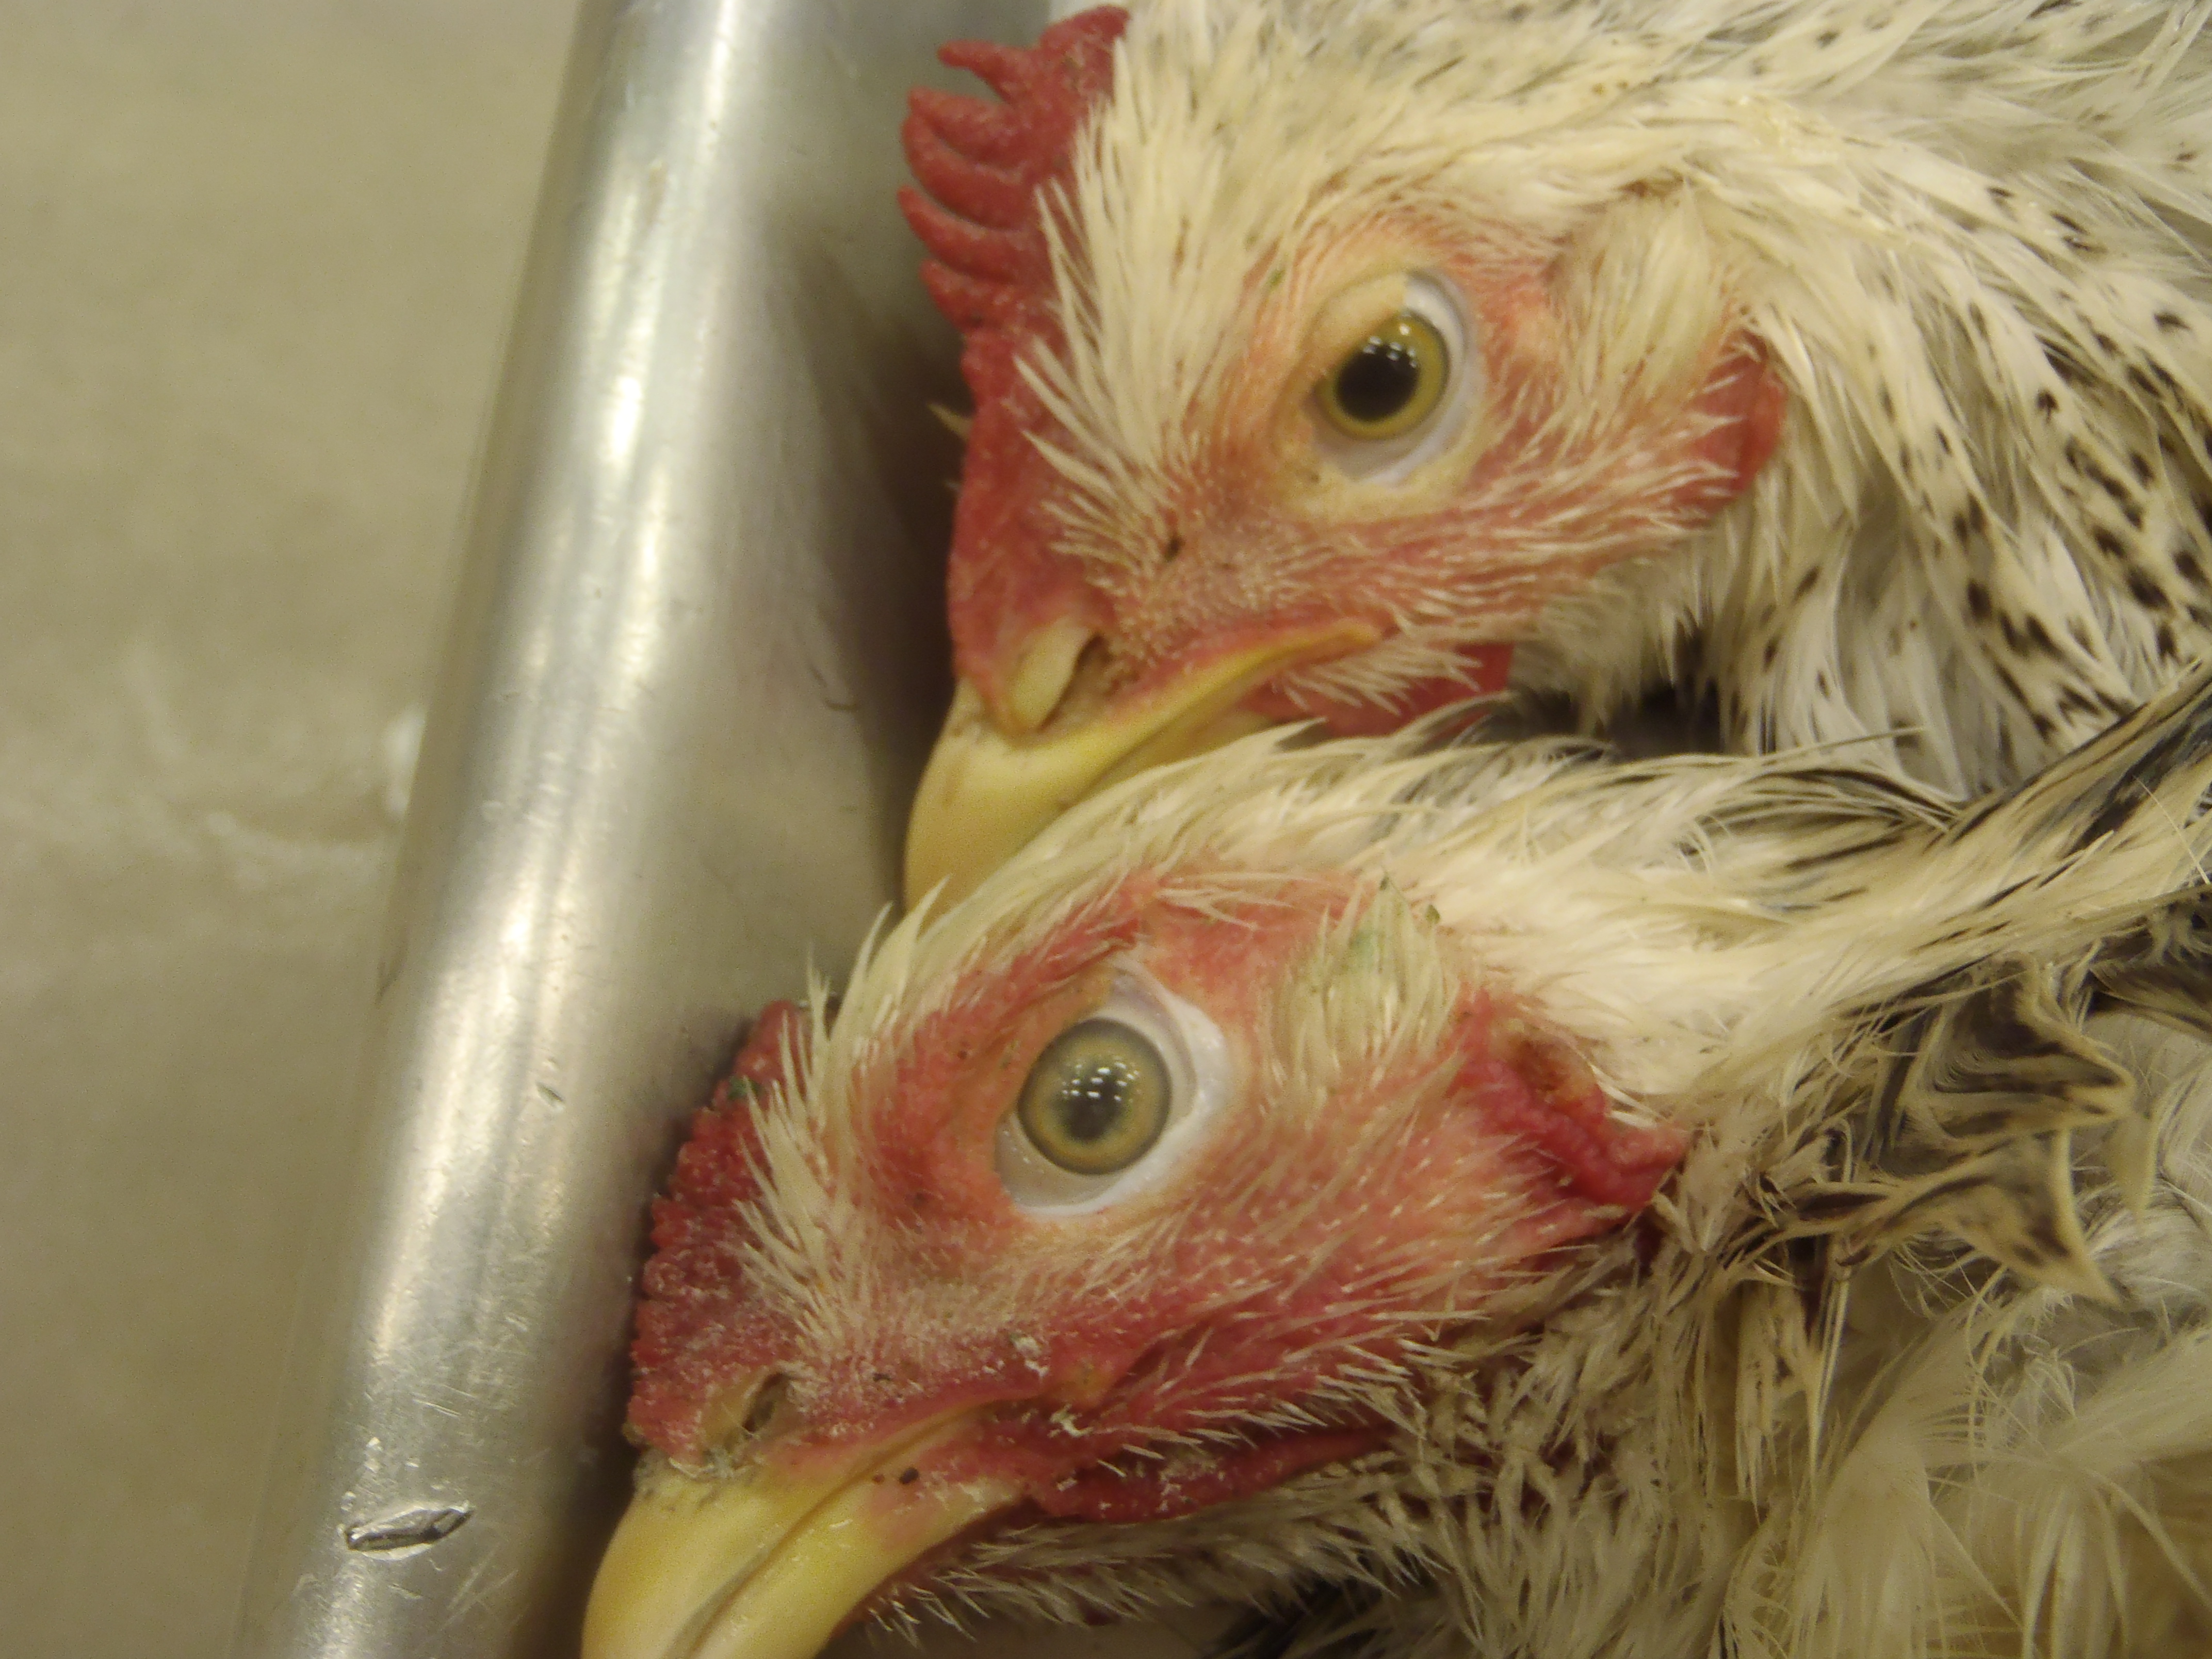 4. Common Infectious Diseases in Hens